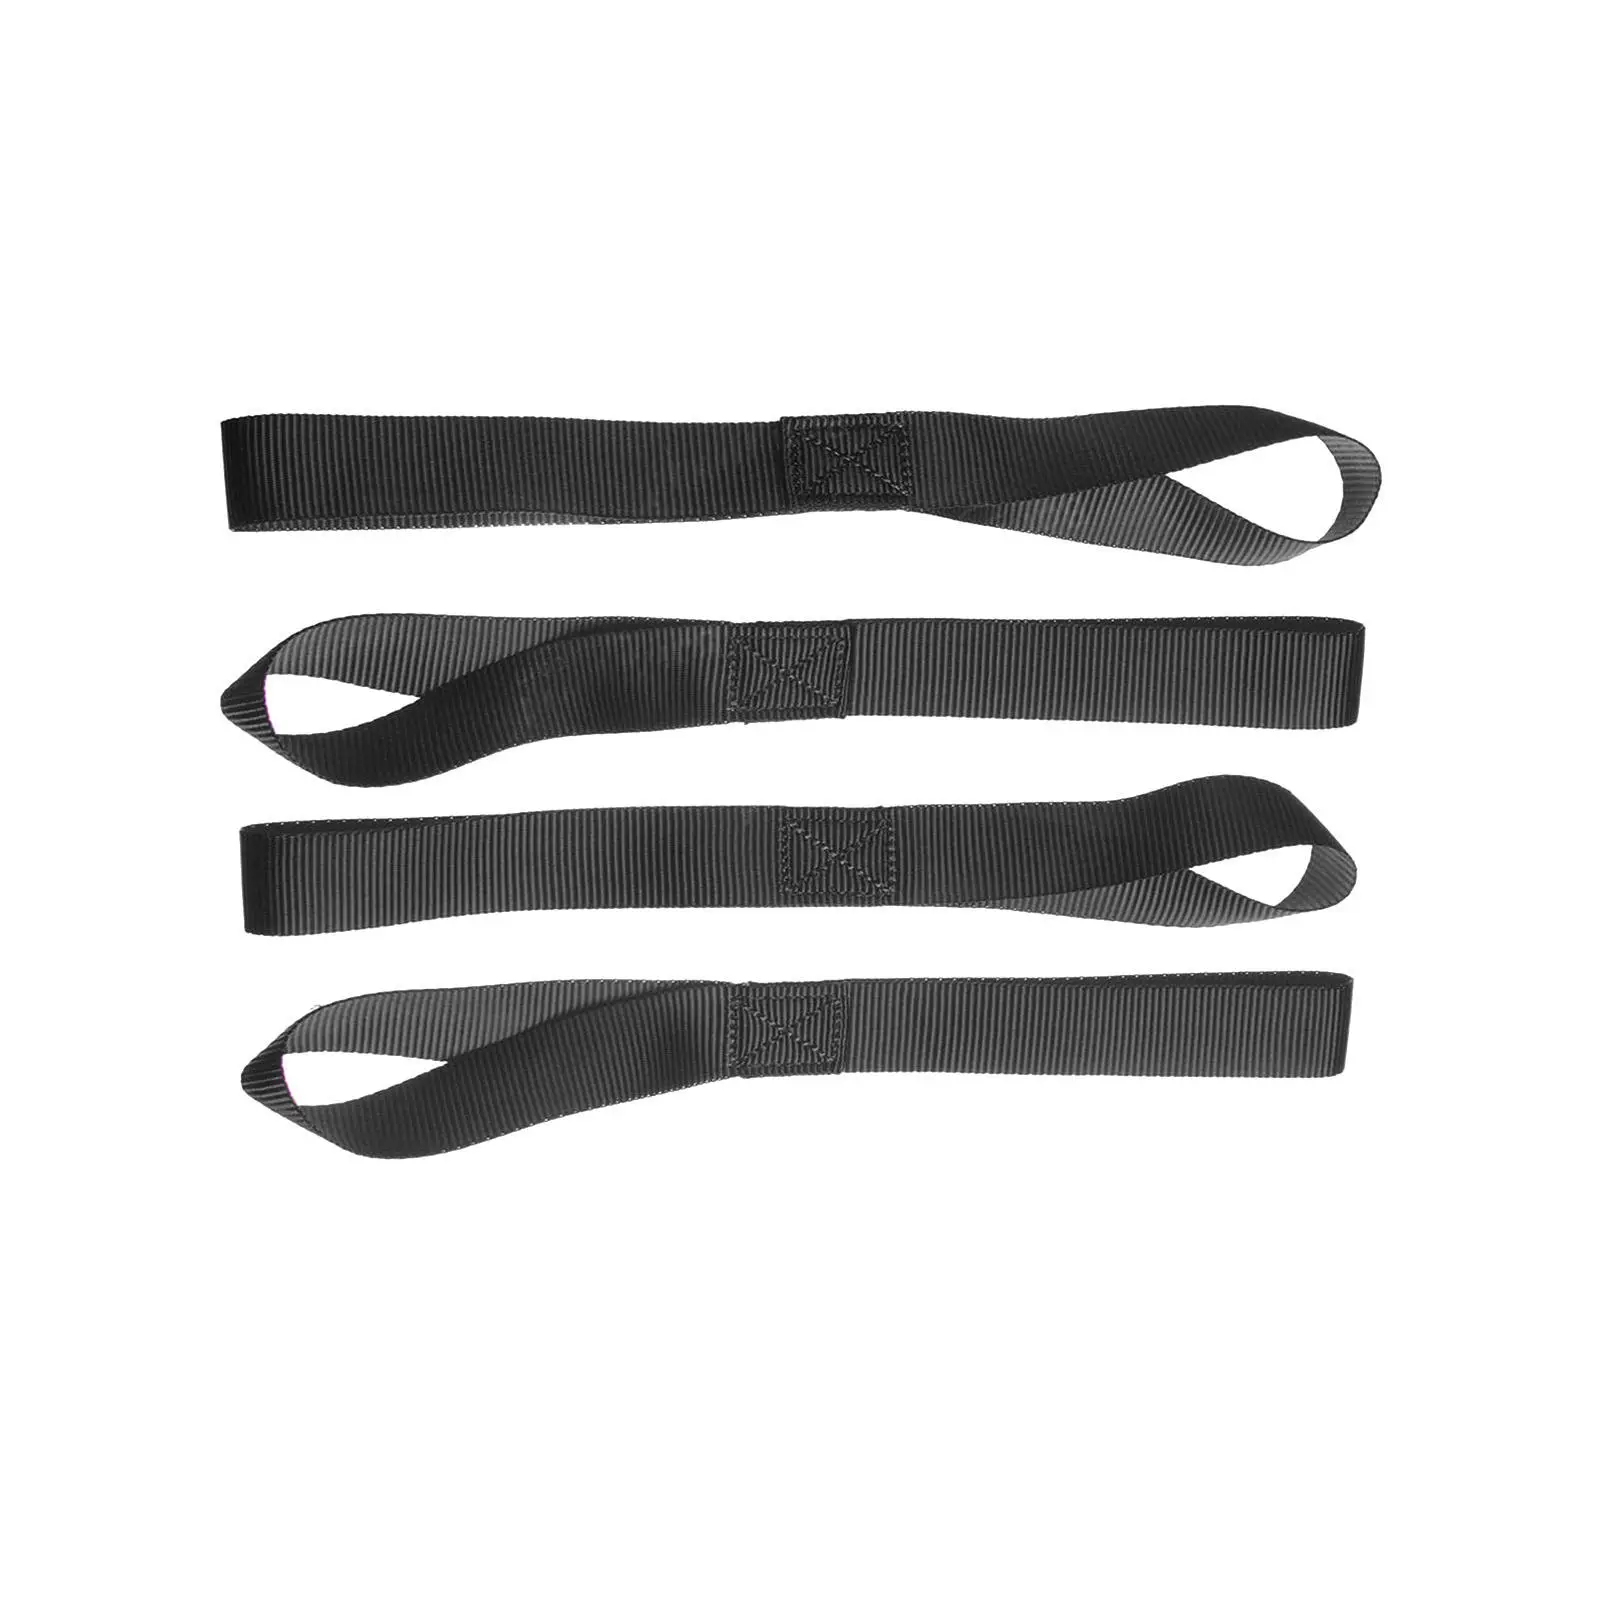 5x Soft Loop Multiple Use Nylon 8800lbs Breaking Strength for Motorcycle Bikes for Towing Trailering Motorcycle Tie-down Straps